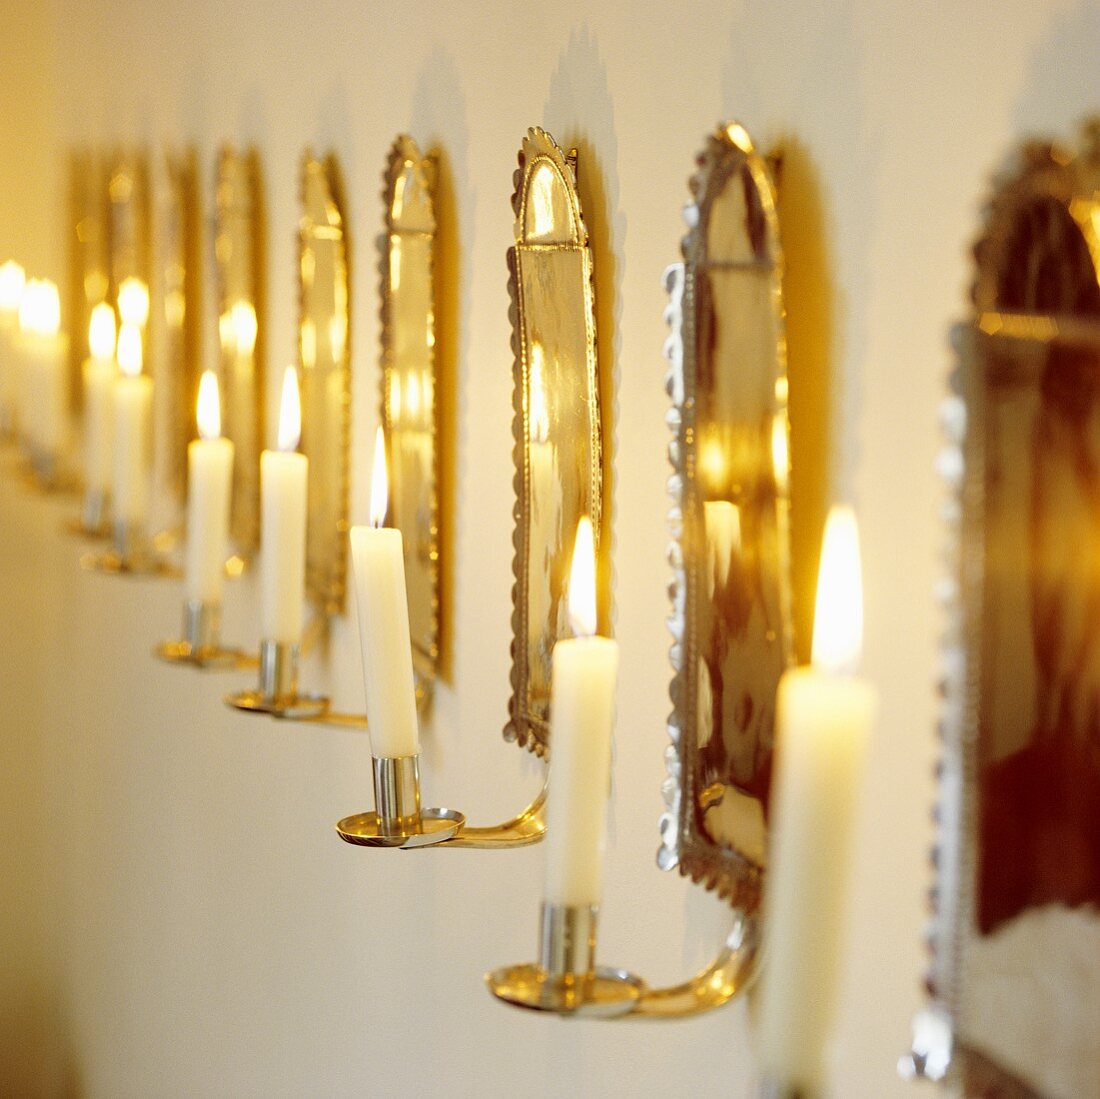 A romantic atmosphere - burning candles in brass-coloured wall holders